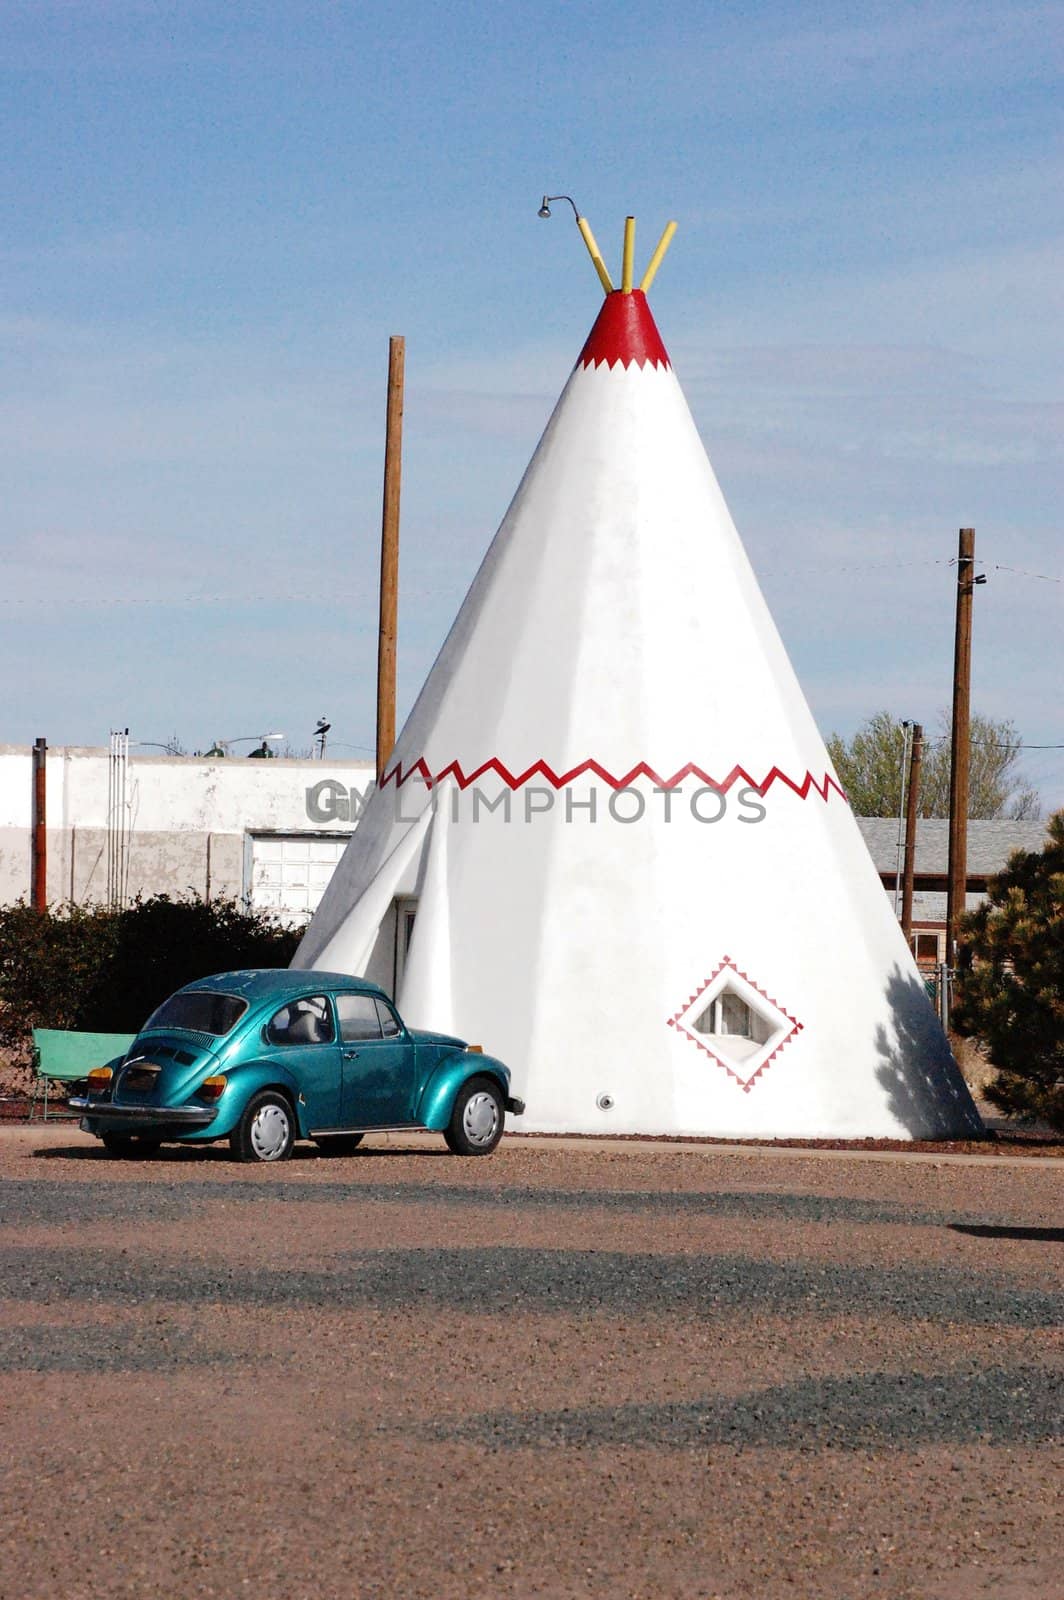 Wigwam motel and bug by RefocusPhoto